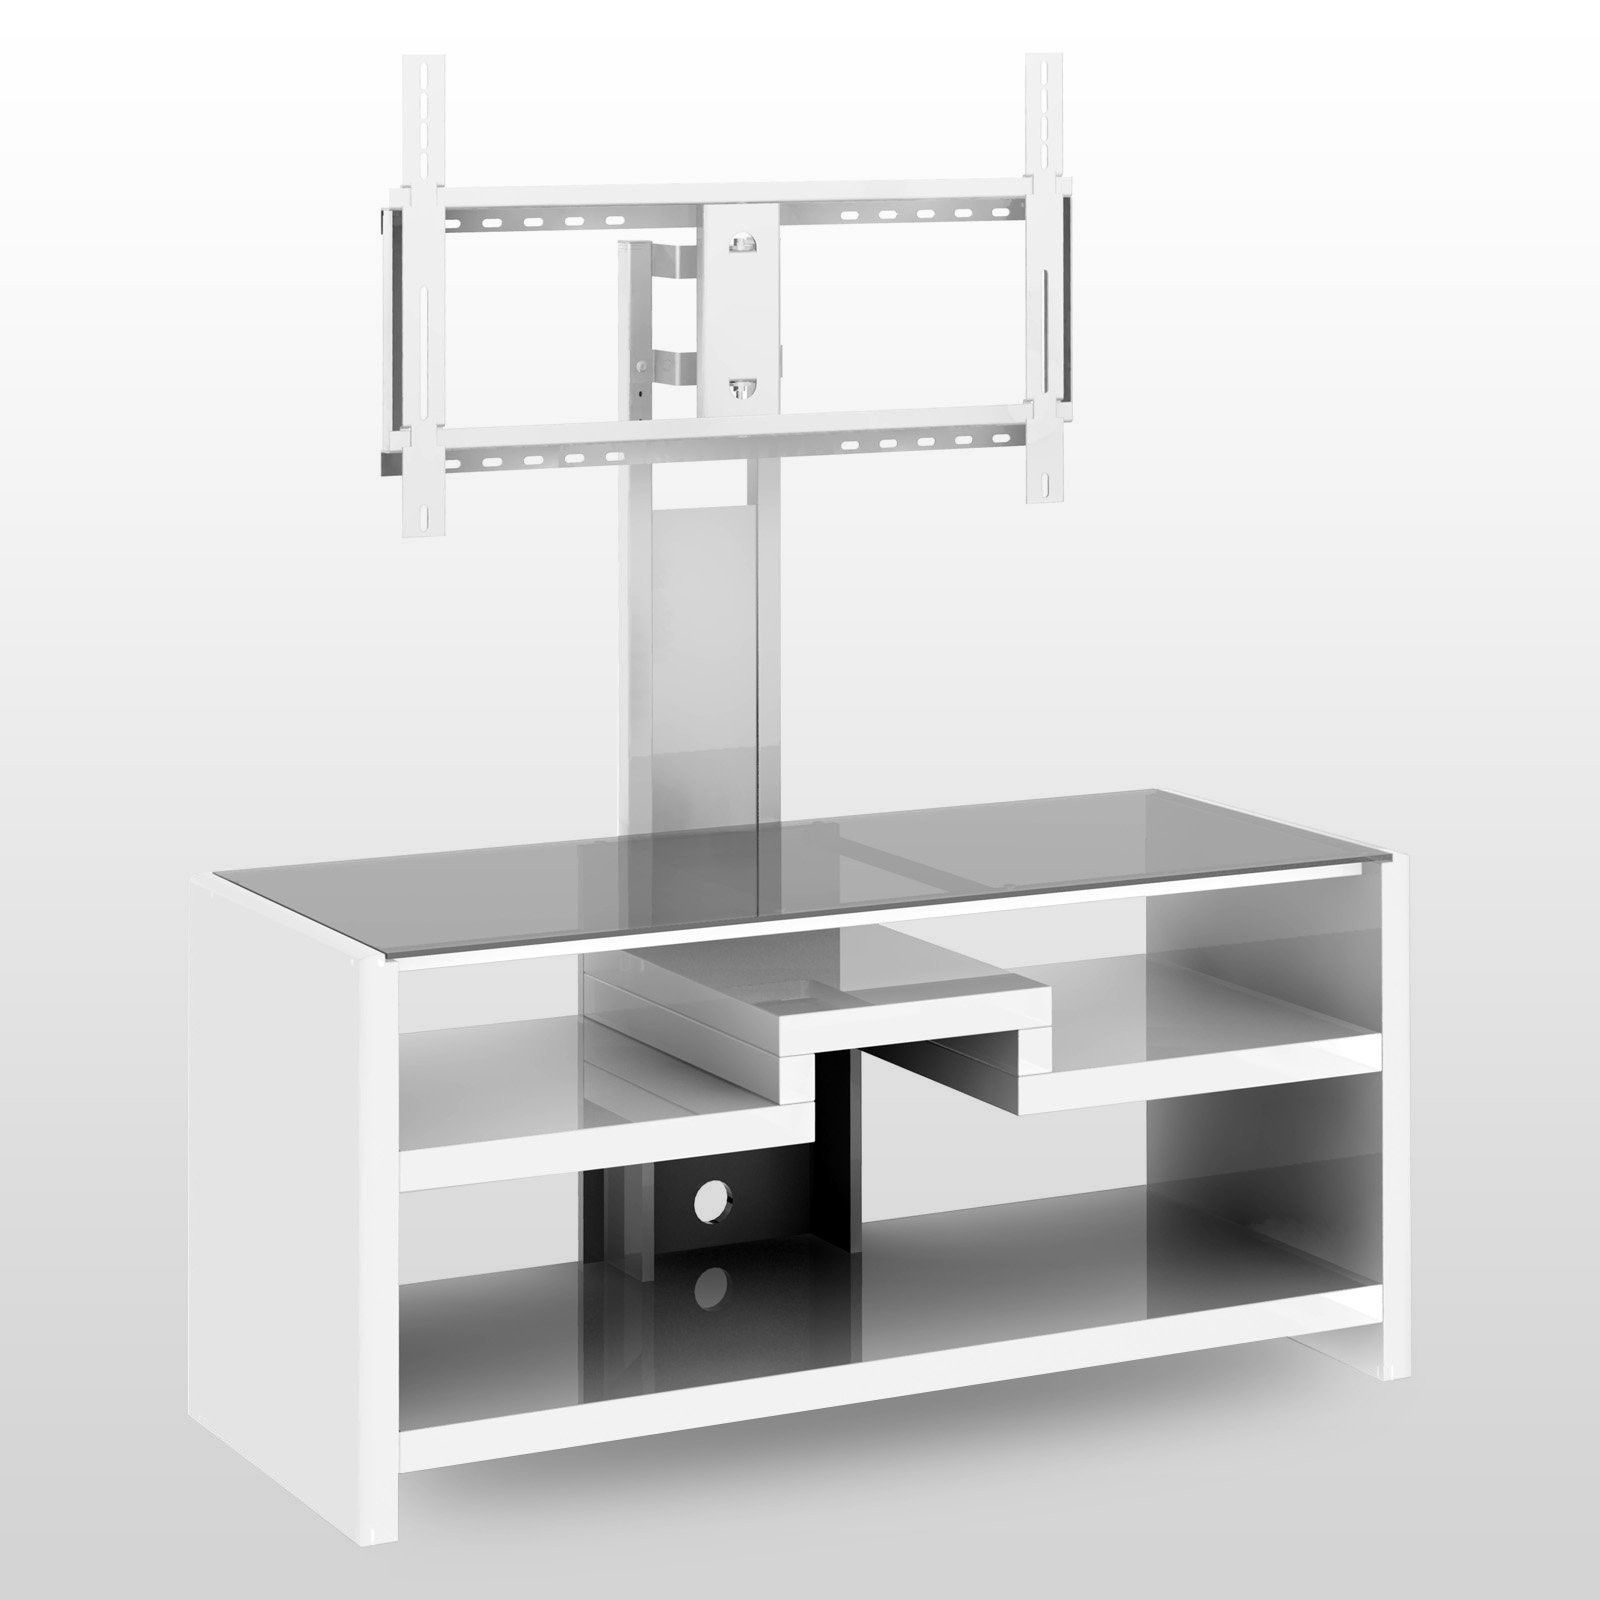 2018 Tall White Tv Cabinet – Kitchen Shelf Display Ideas Regarding Tall Tv Stands For Flat Screen (View 14 of 15)